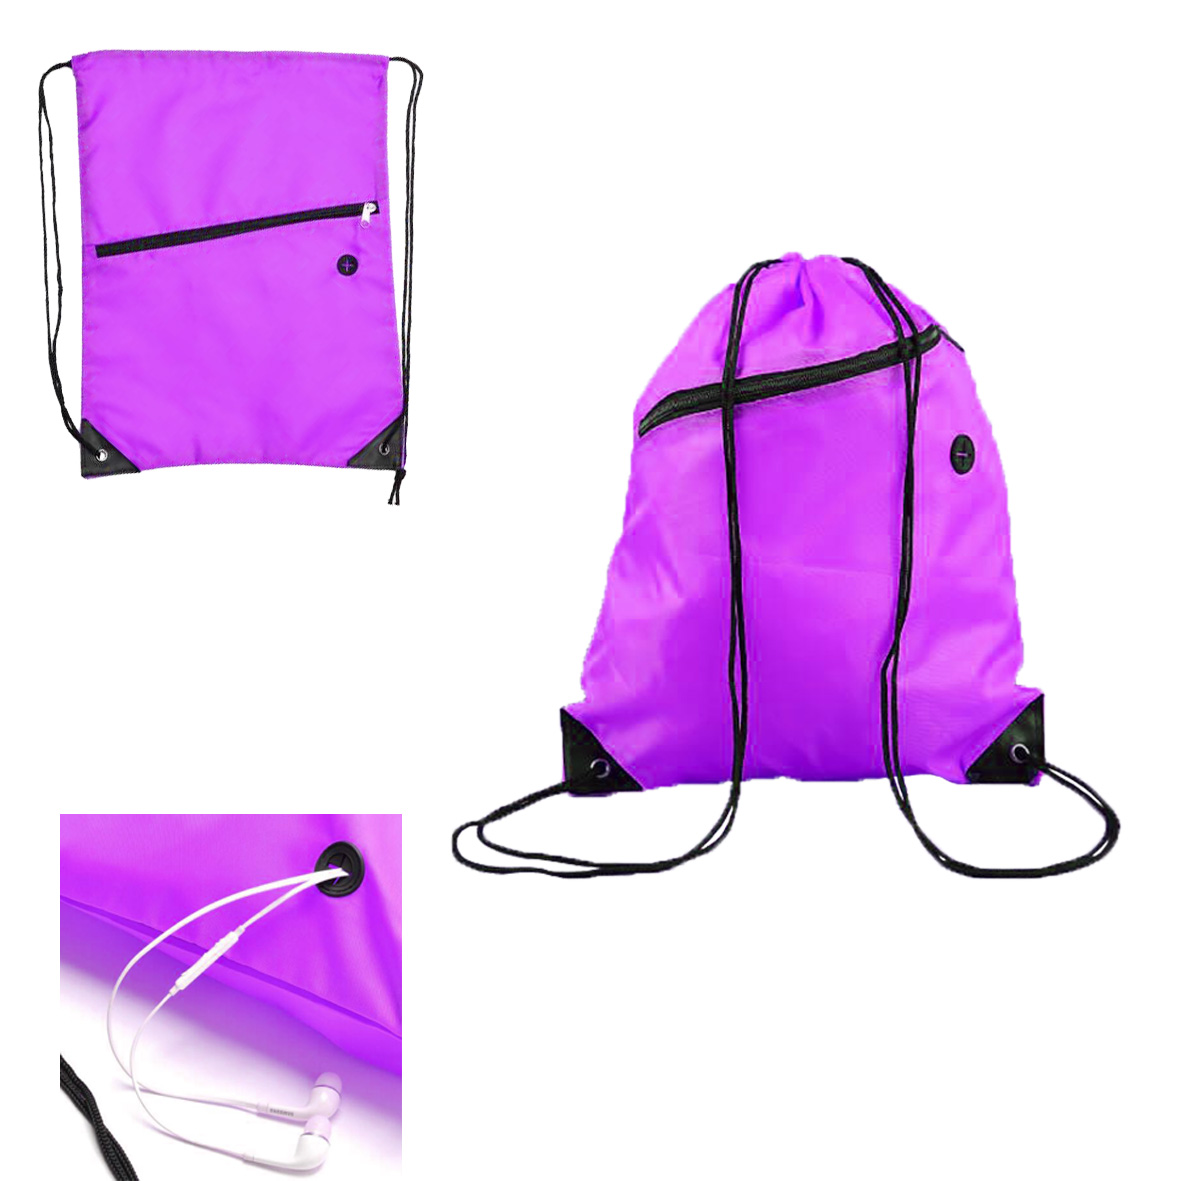 GL-AAA1326 13.5inch x 15.5inch 210D Drawstring Sportpack with Zipped Pouch